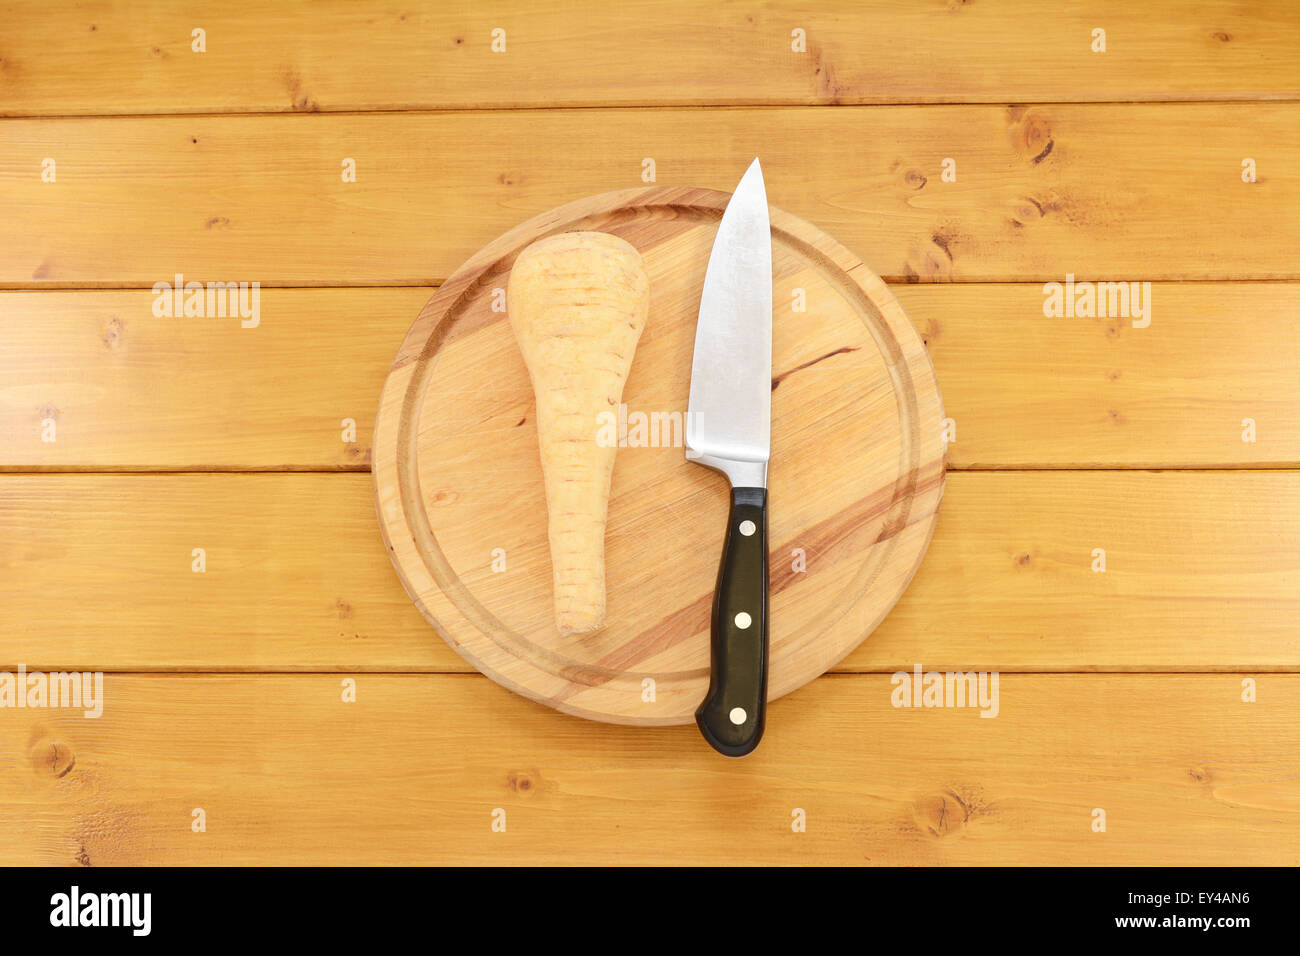 The Best Non-Toxic Cutting Boards - Umbel Organics